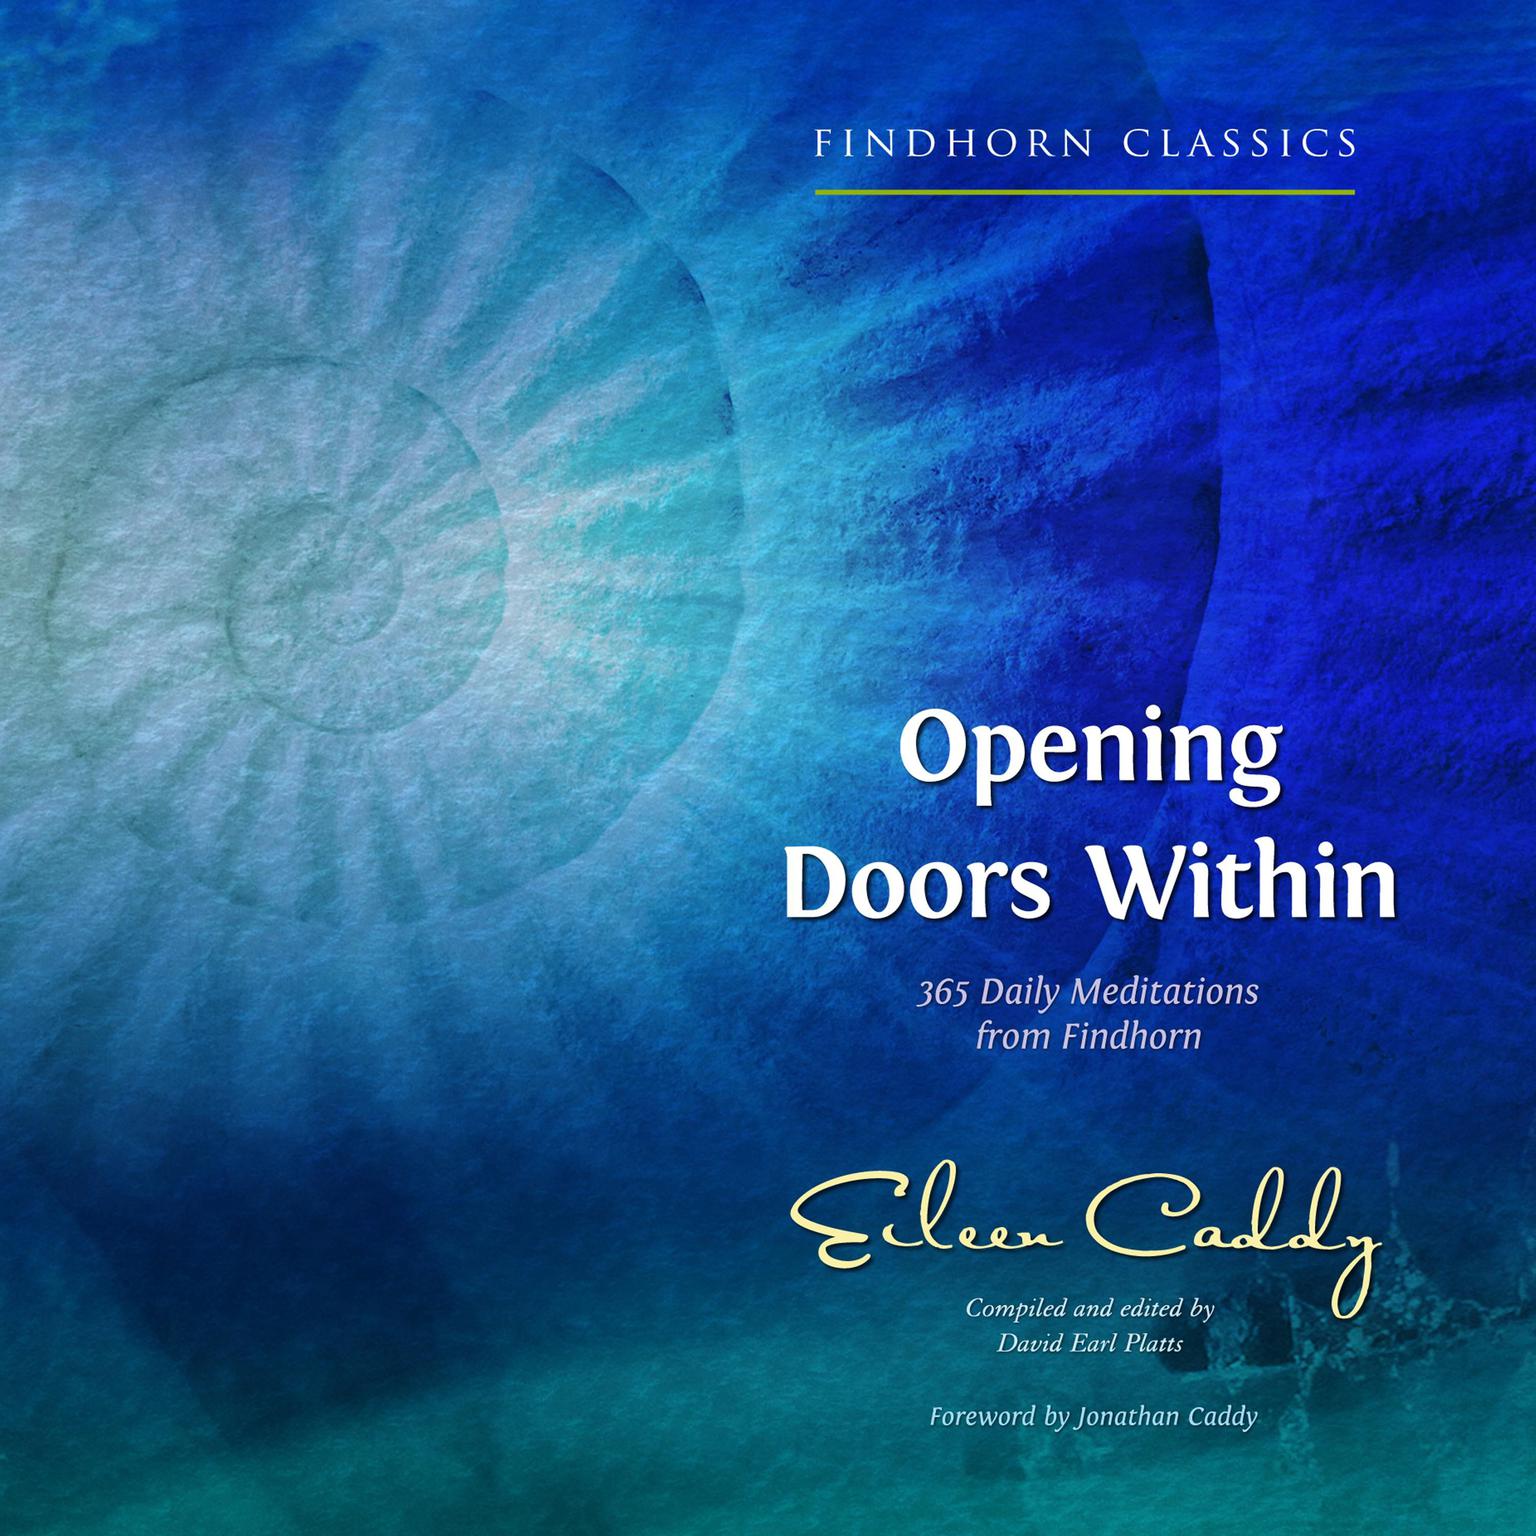 Opening Doors Within: 365 Daily Meditations from Findhorn Audiobook, by Eileen Caddy